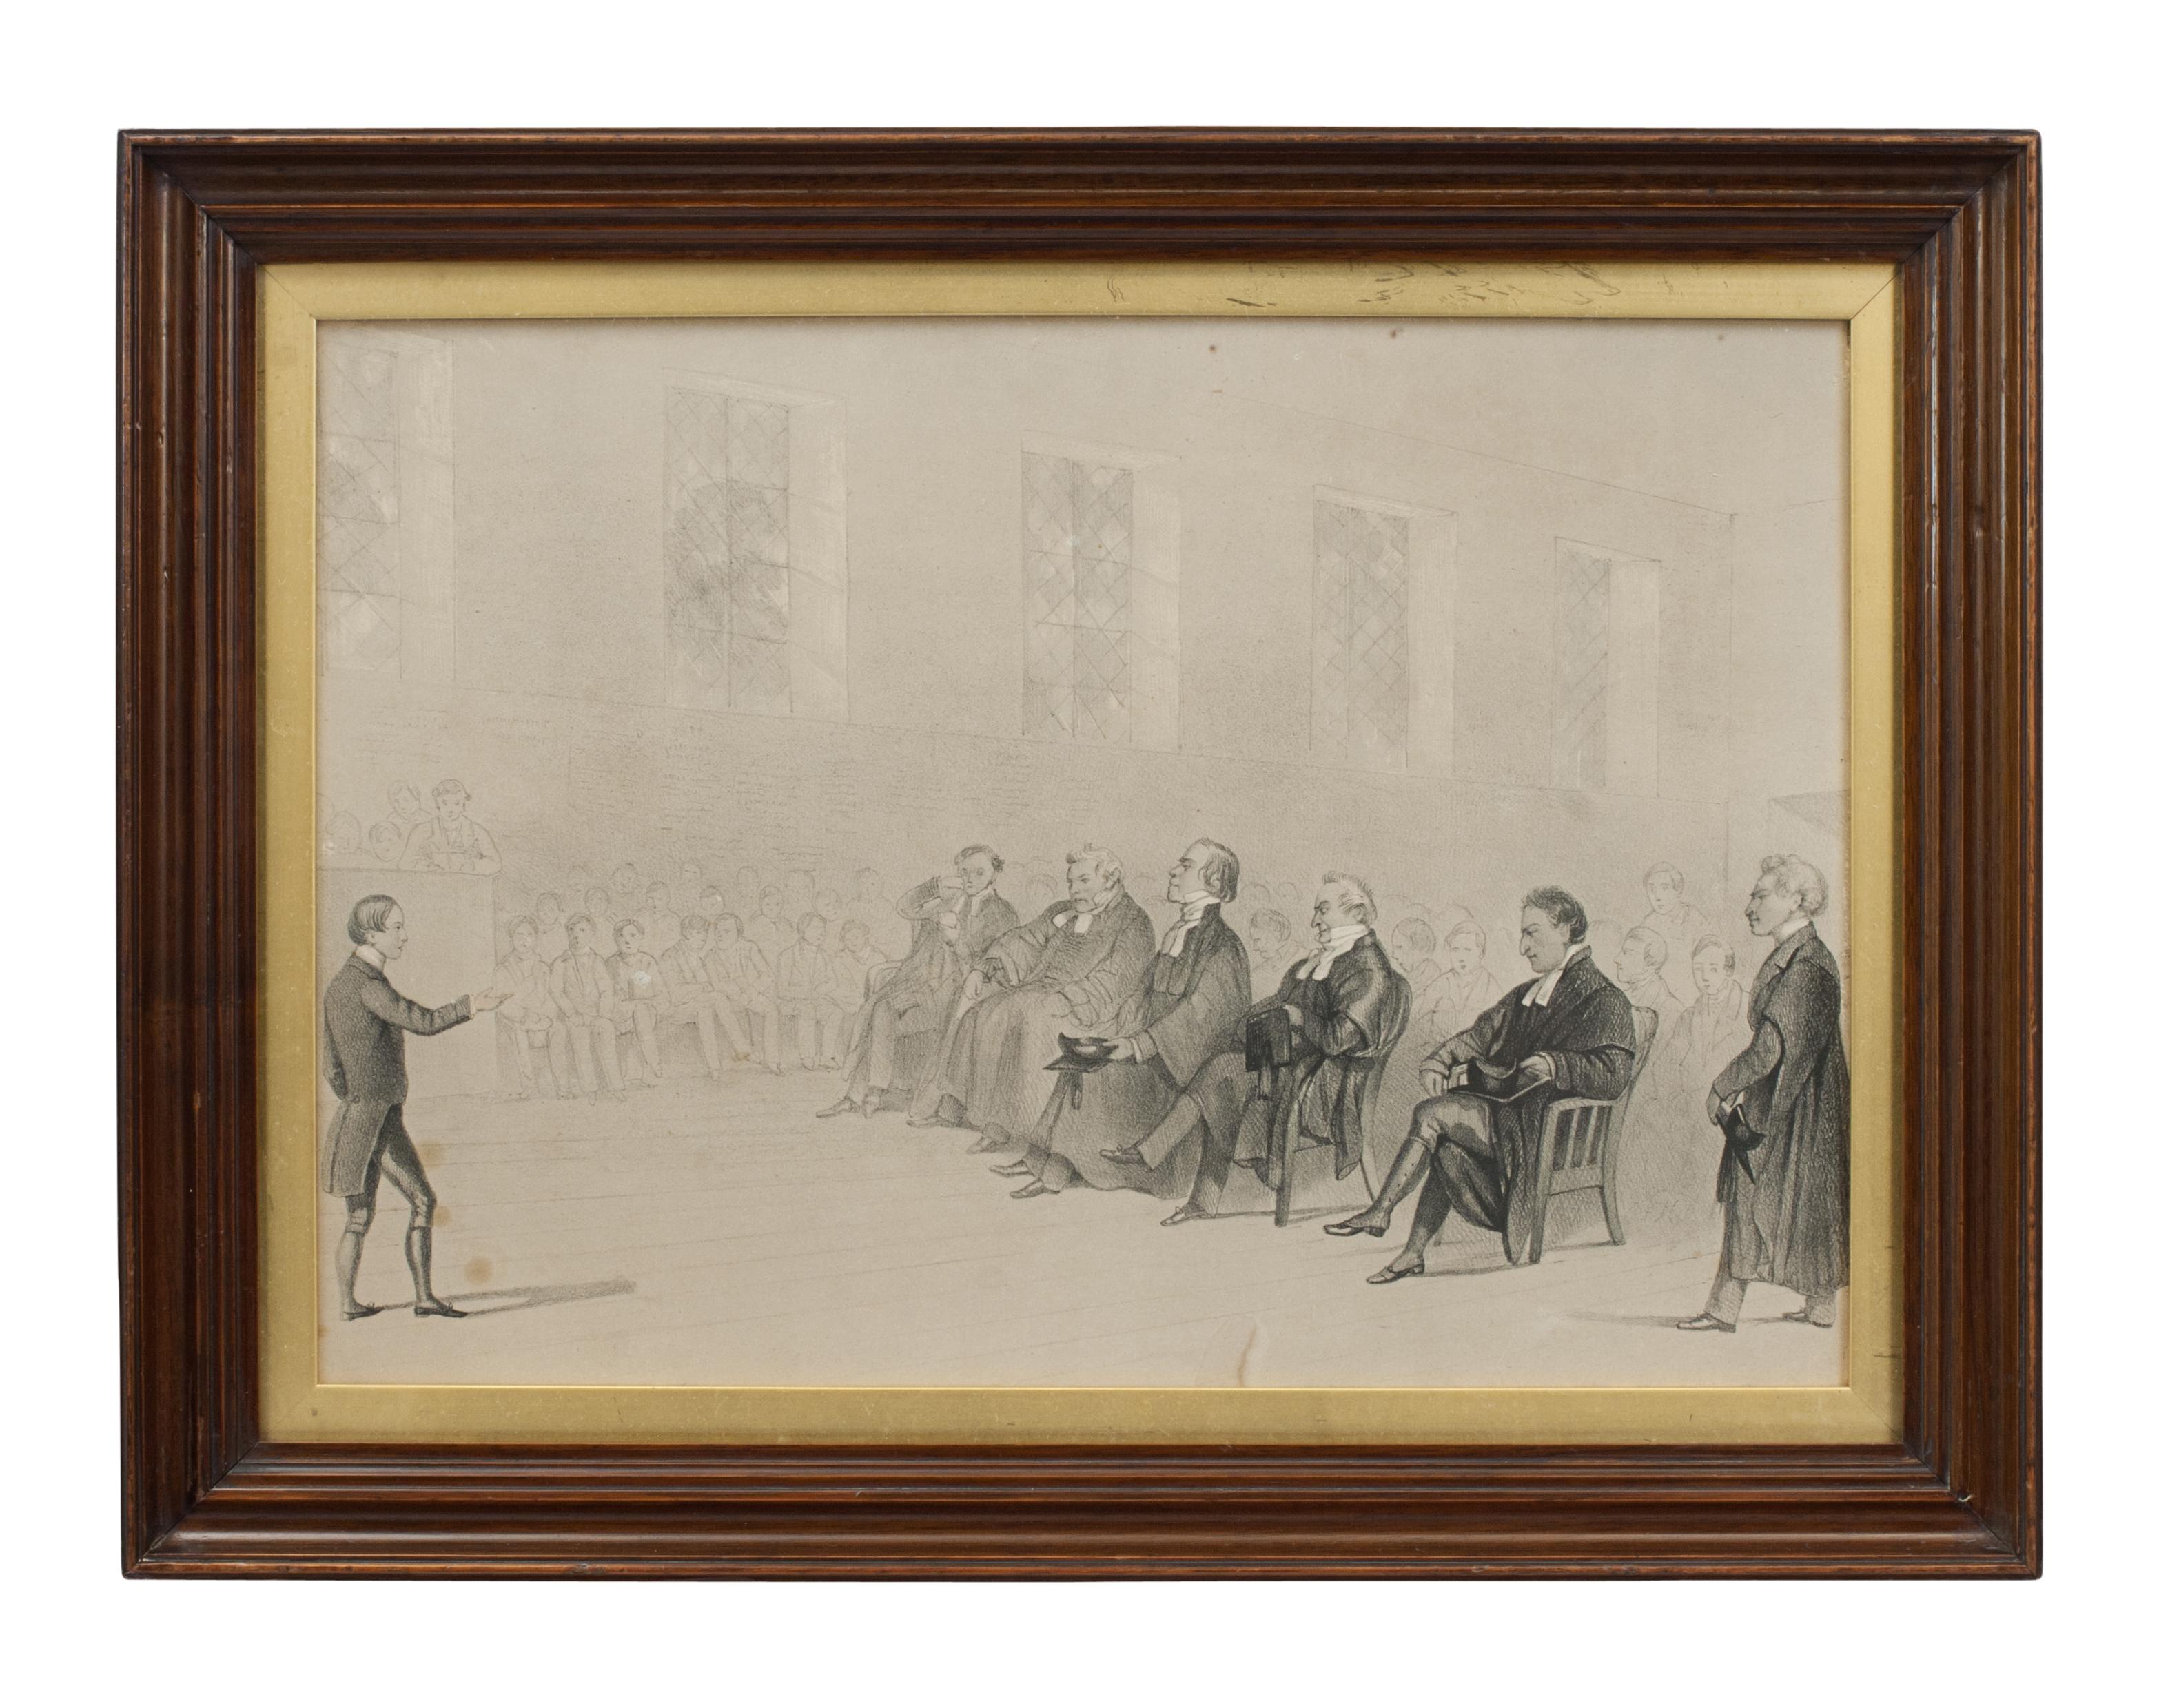 Eight Student Life Lithographs, A Few Familiar Scenes, Eton & Oxford.
Set of eight framed tinted lithographs with hand-colouring after the pictures by Rev George Robert Winter. Published in 1848 by J.Ryman, High Street, Oxford. Framed in original